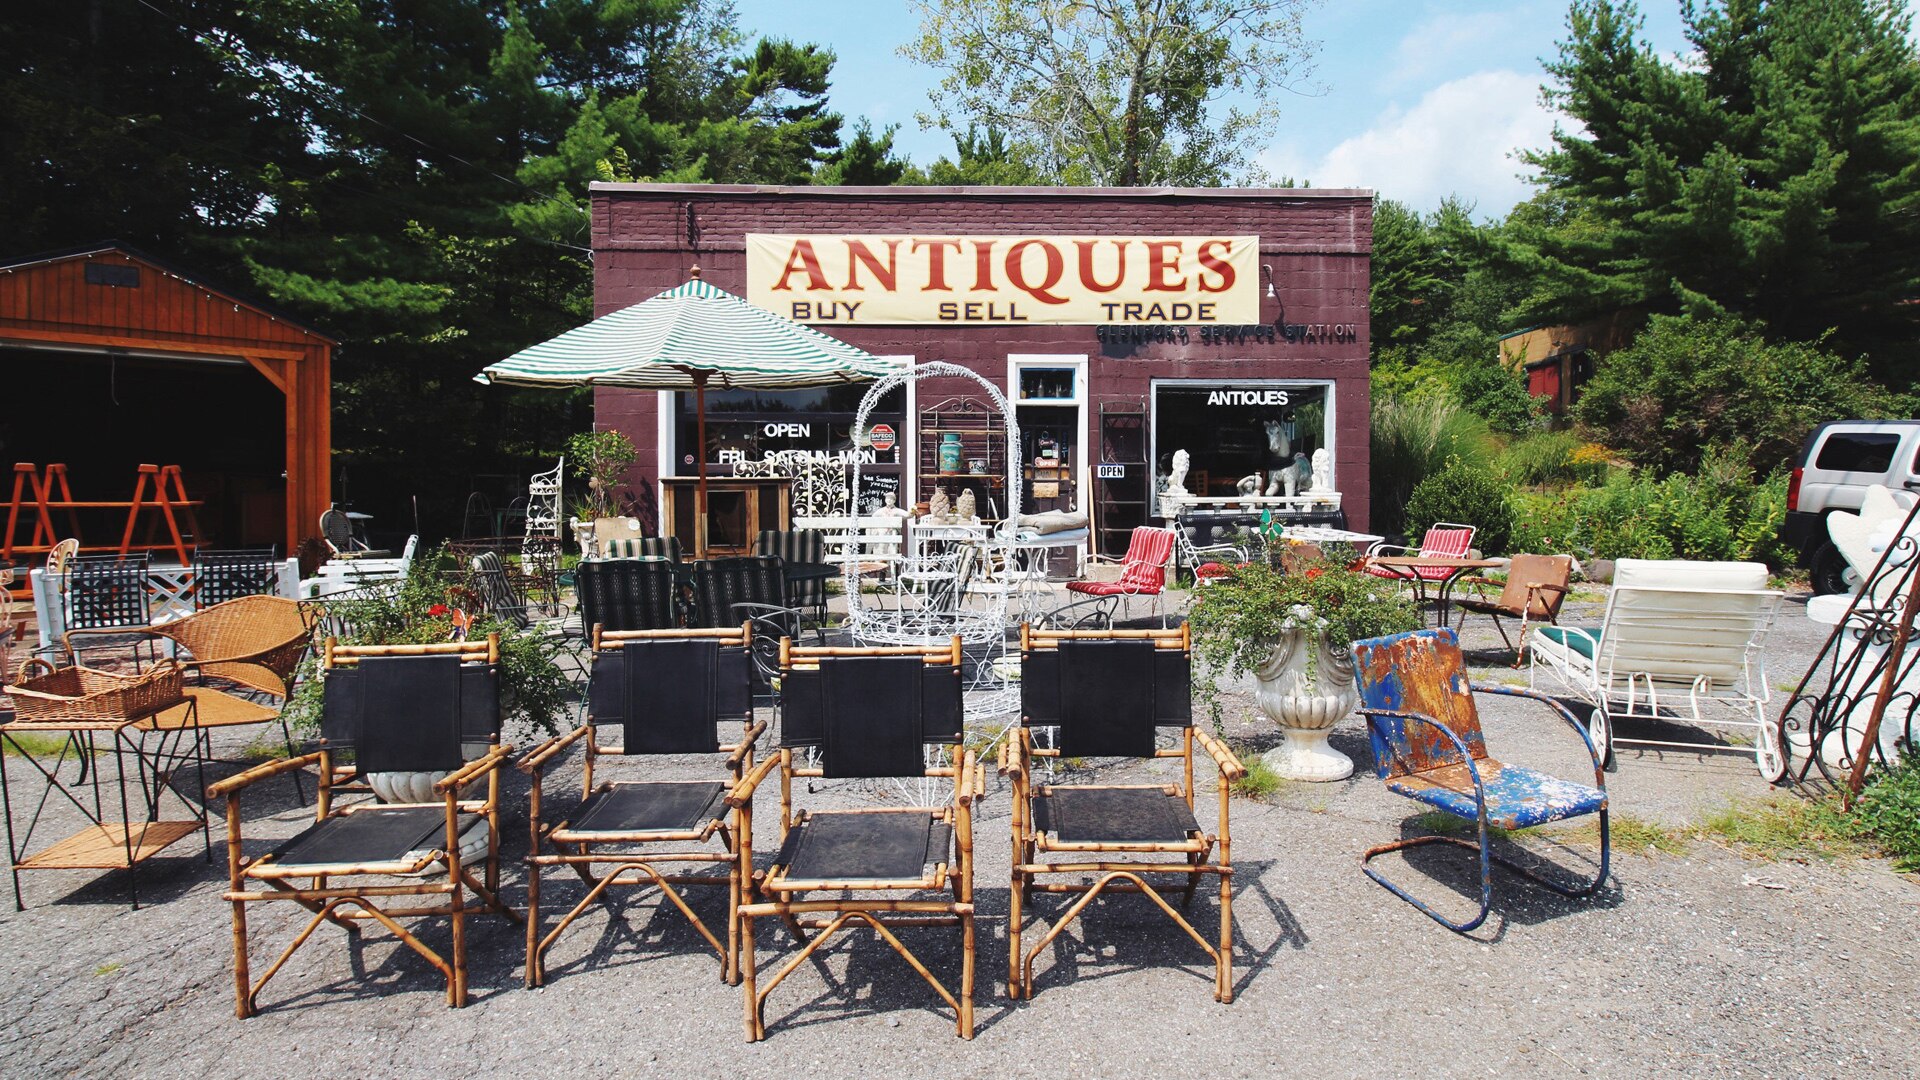 Roadside antiques in New York state